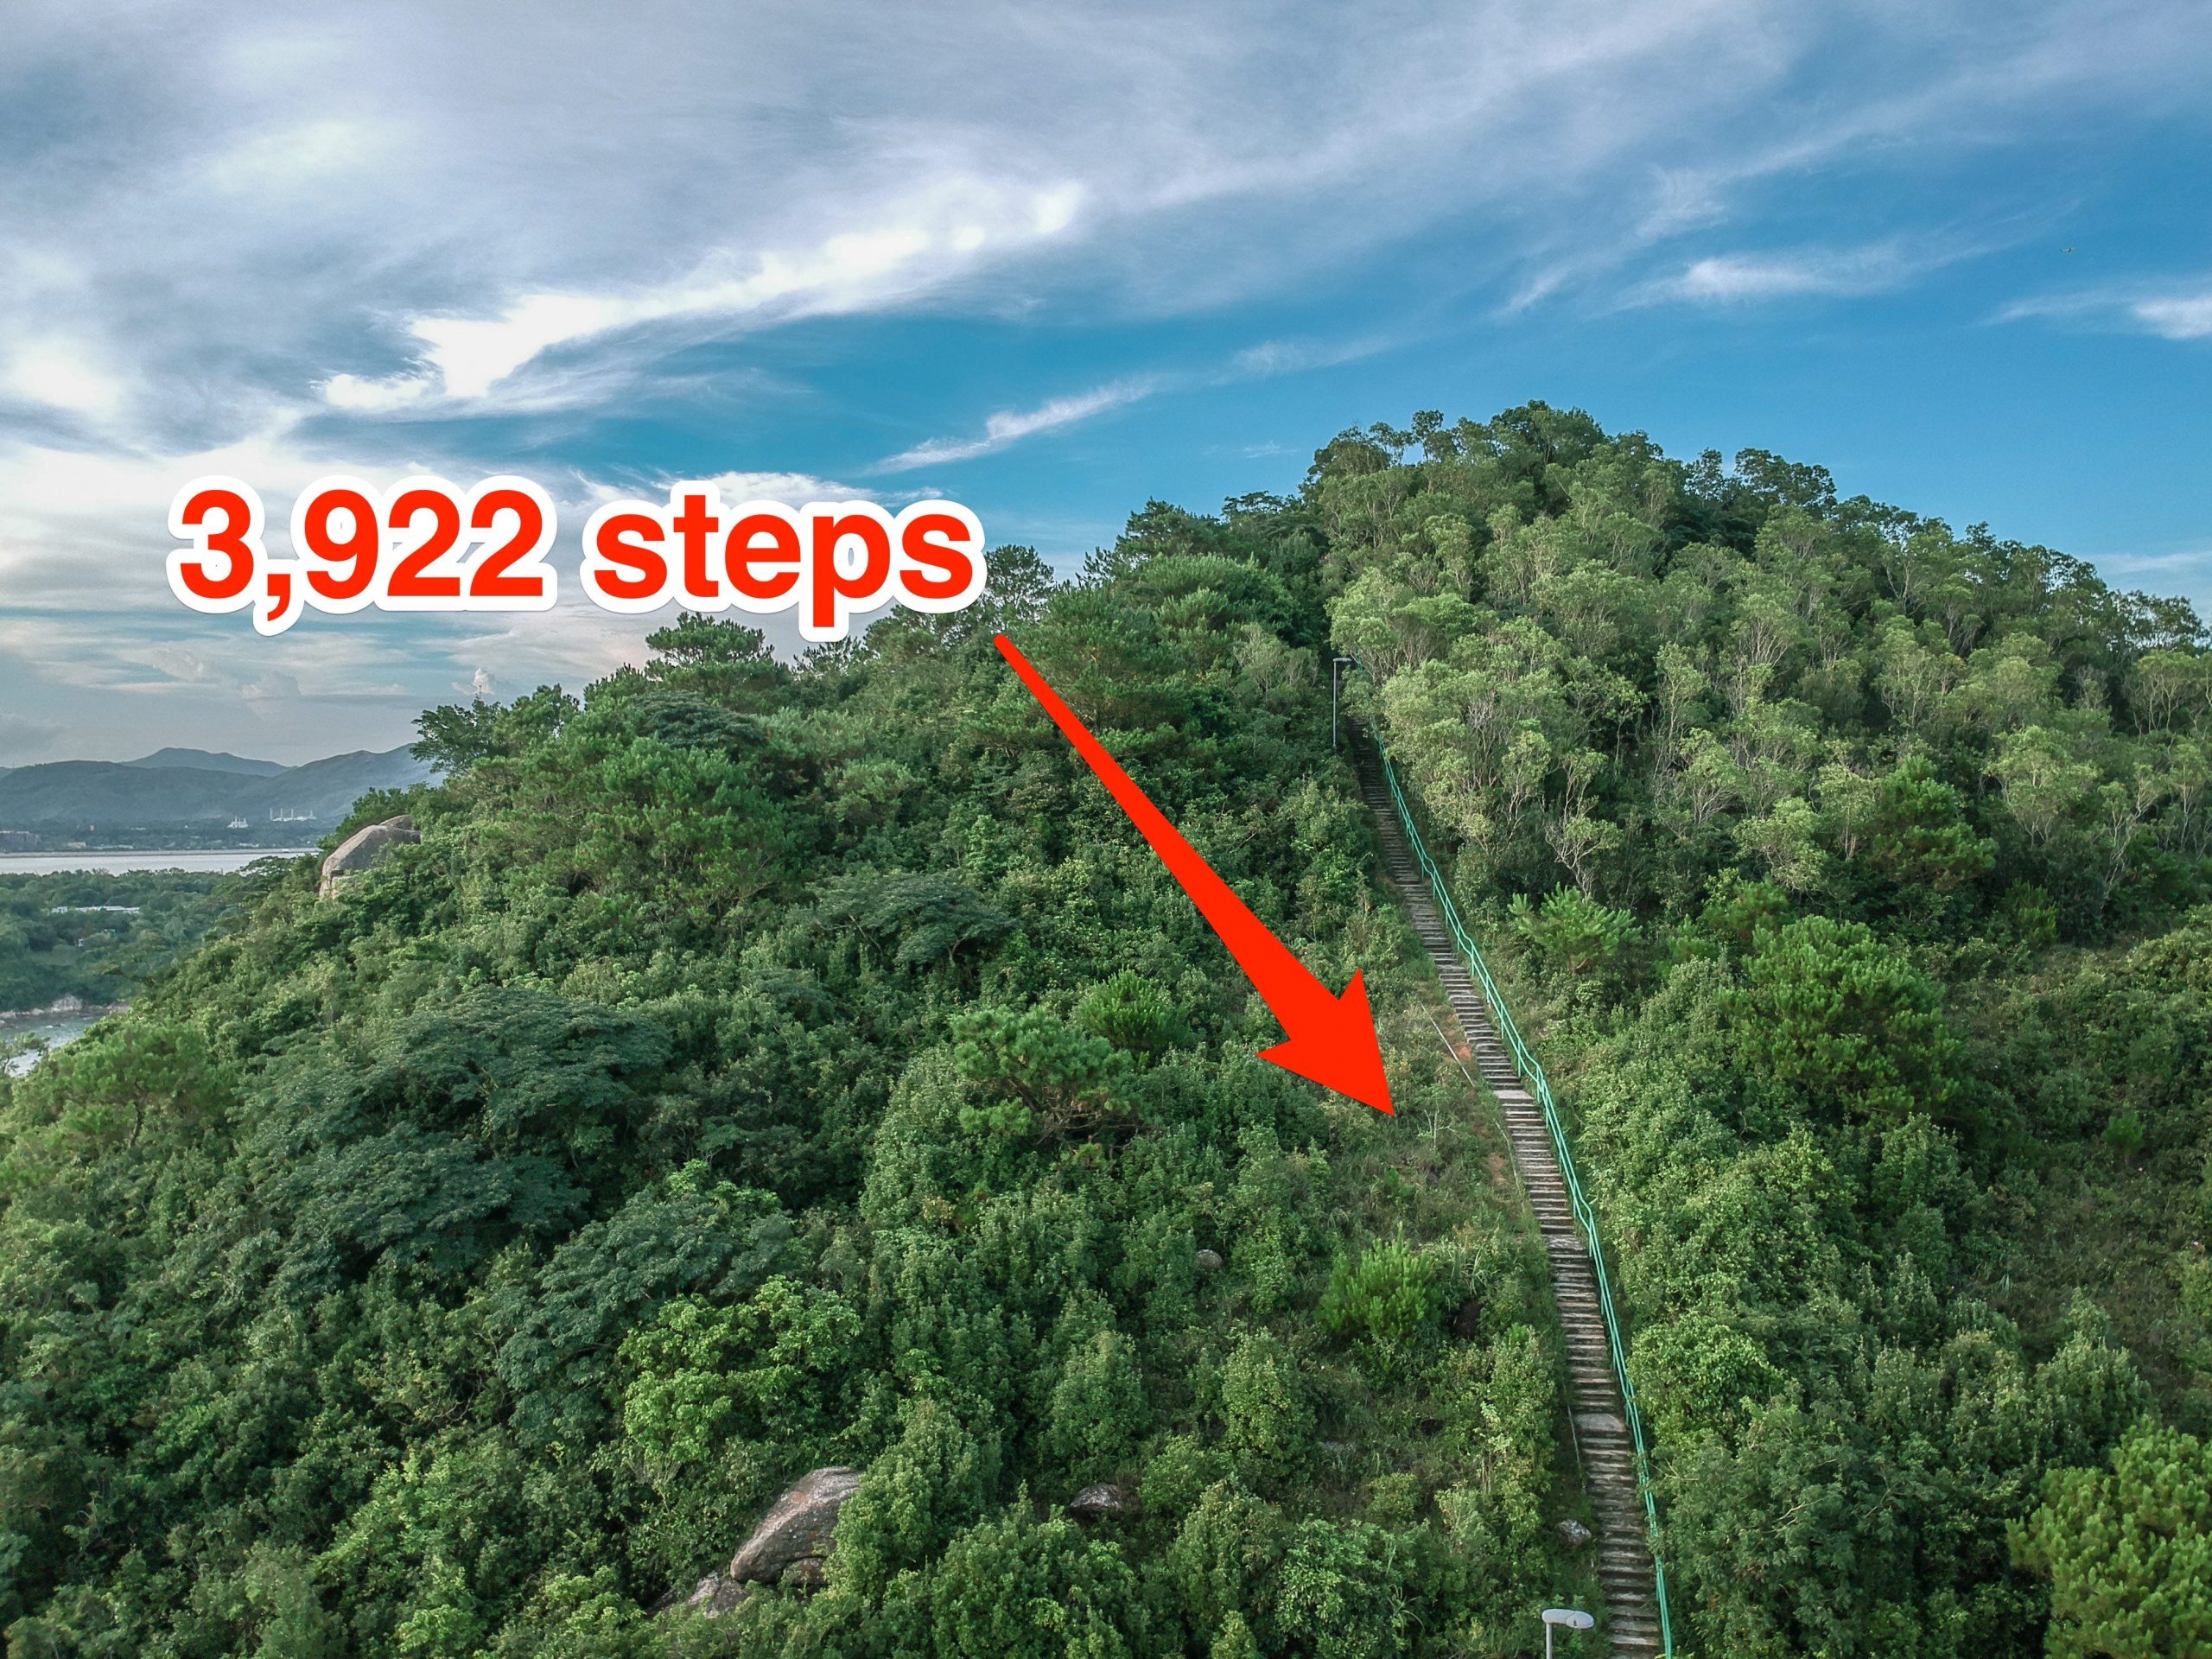 Haiku staircase, made up of 3,922 steps built into the Ko'olau mountain range, is pictured.